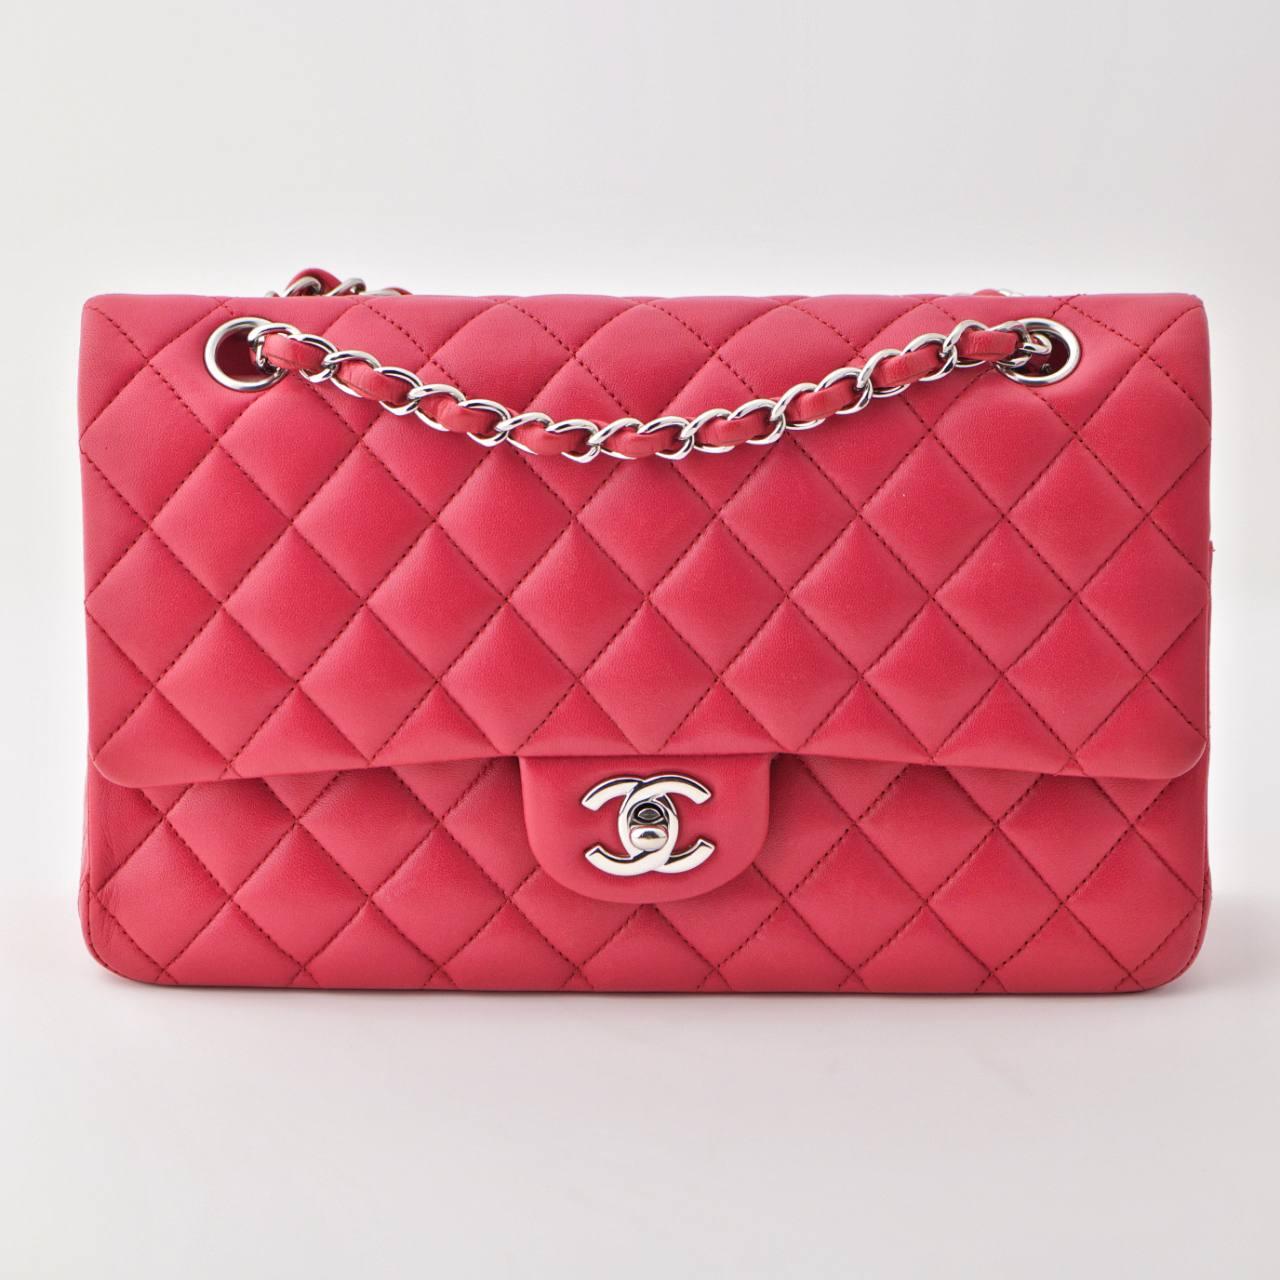 *great deal* The lambskin leather is super soft, making this handbag one of our top picks. It's unique and the striking pinkish red colour will make you stand out in any crowd. Don't wait, add this Classic Chanel - Medium bag to your basket now